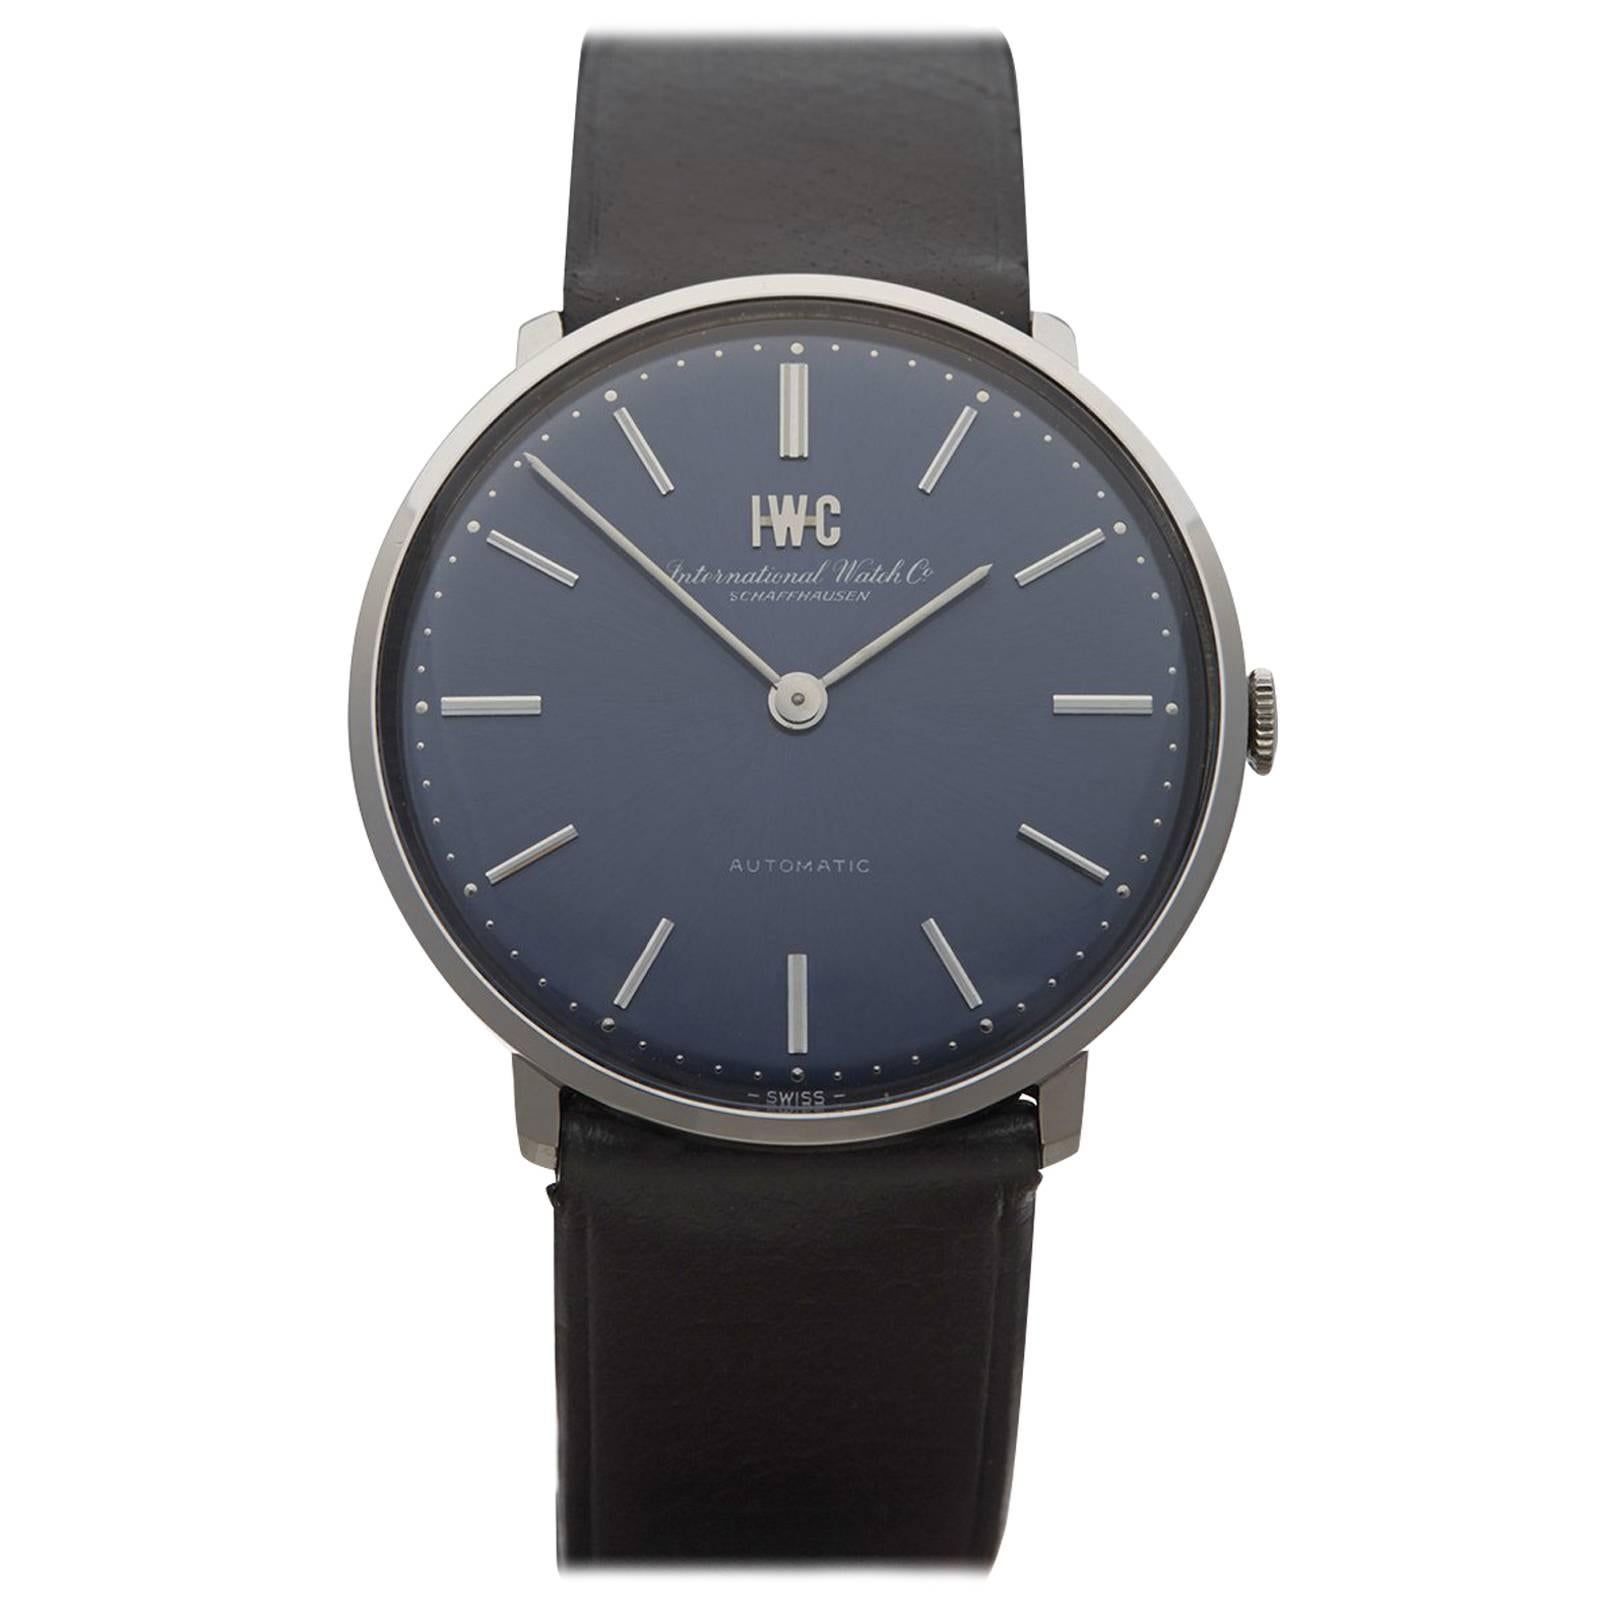  IWC Stainless Steel Cal.443 Mechanical Wind Wristwatch Ref 2191361 1960s